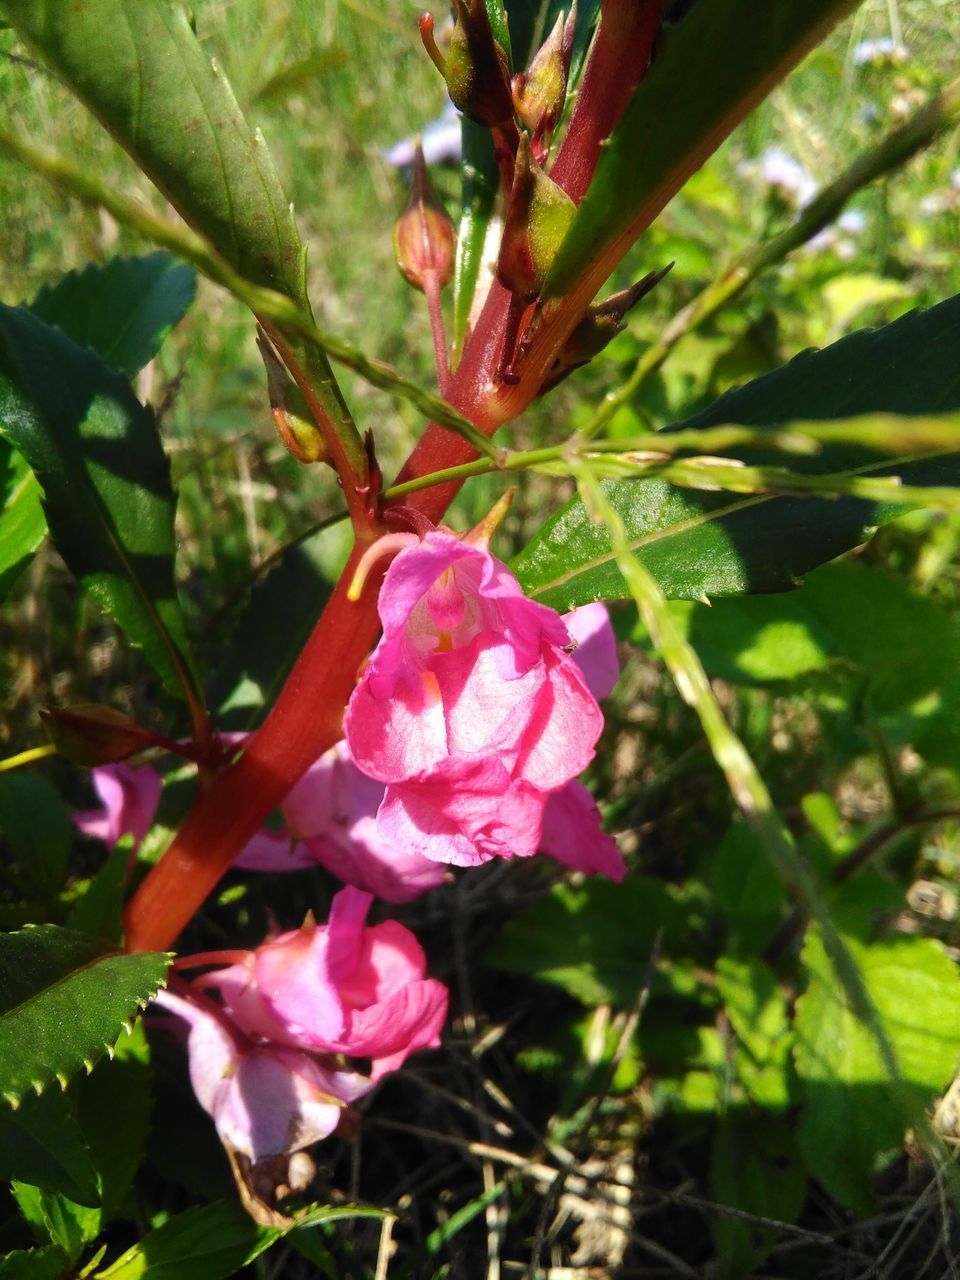 CLOSE-UP OF PINK ROSE IN BLOOM